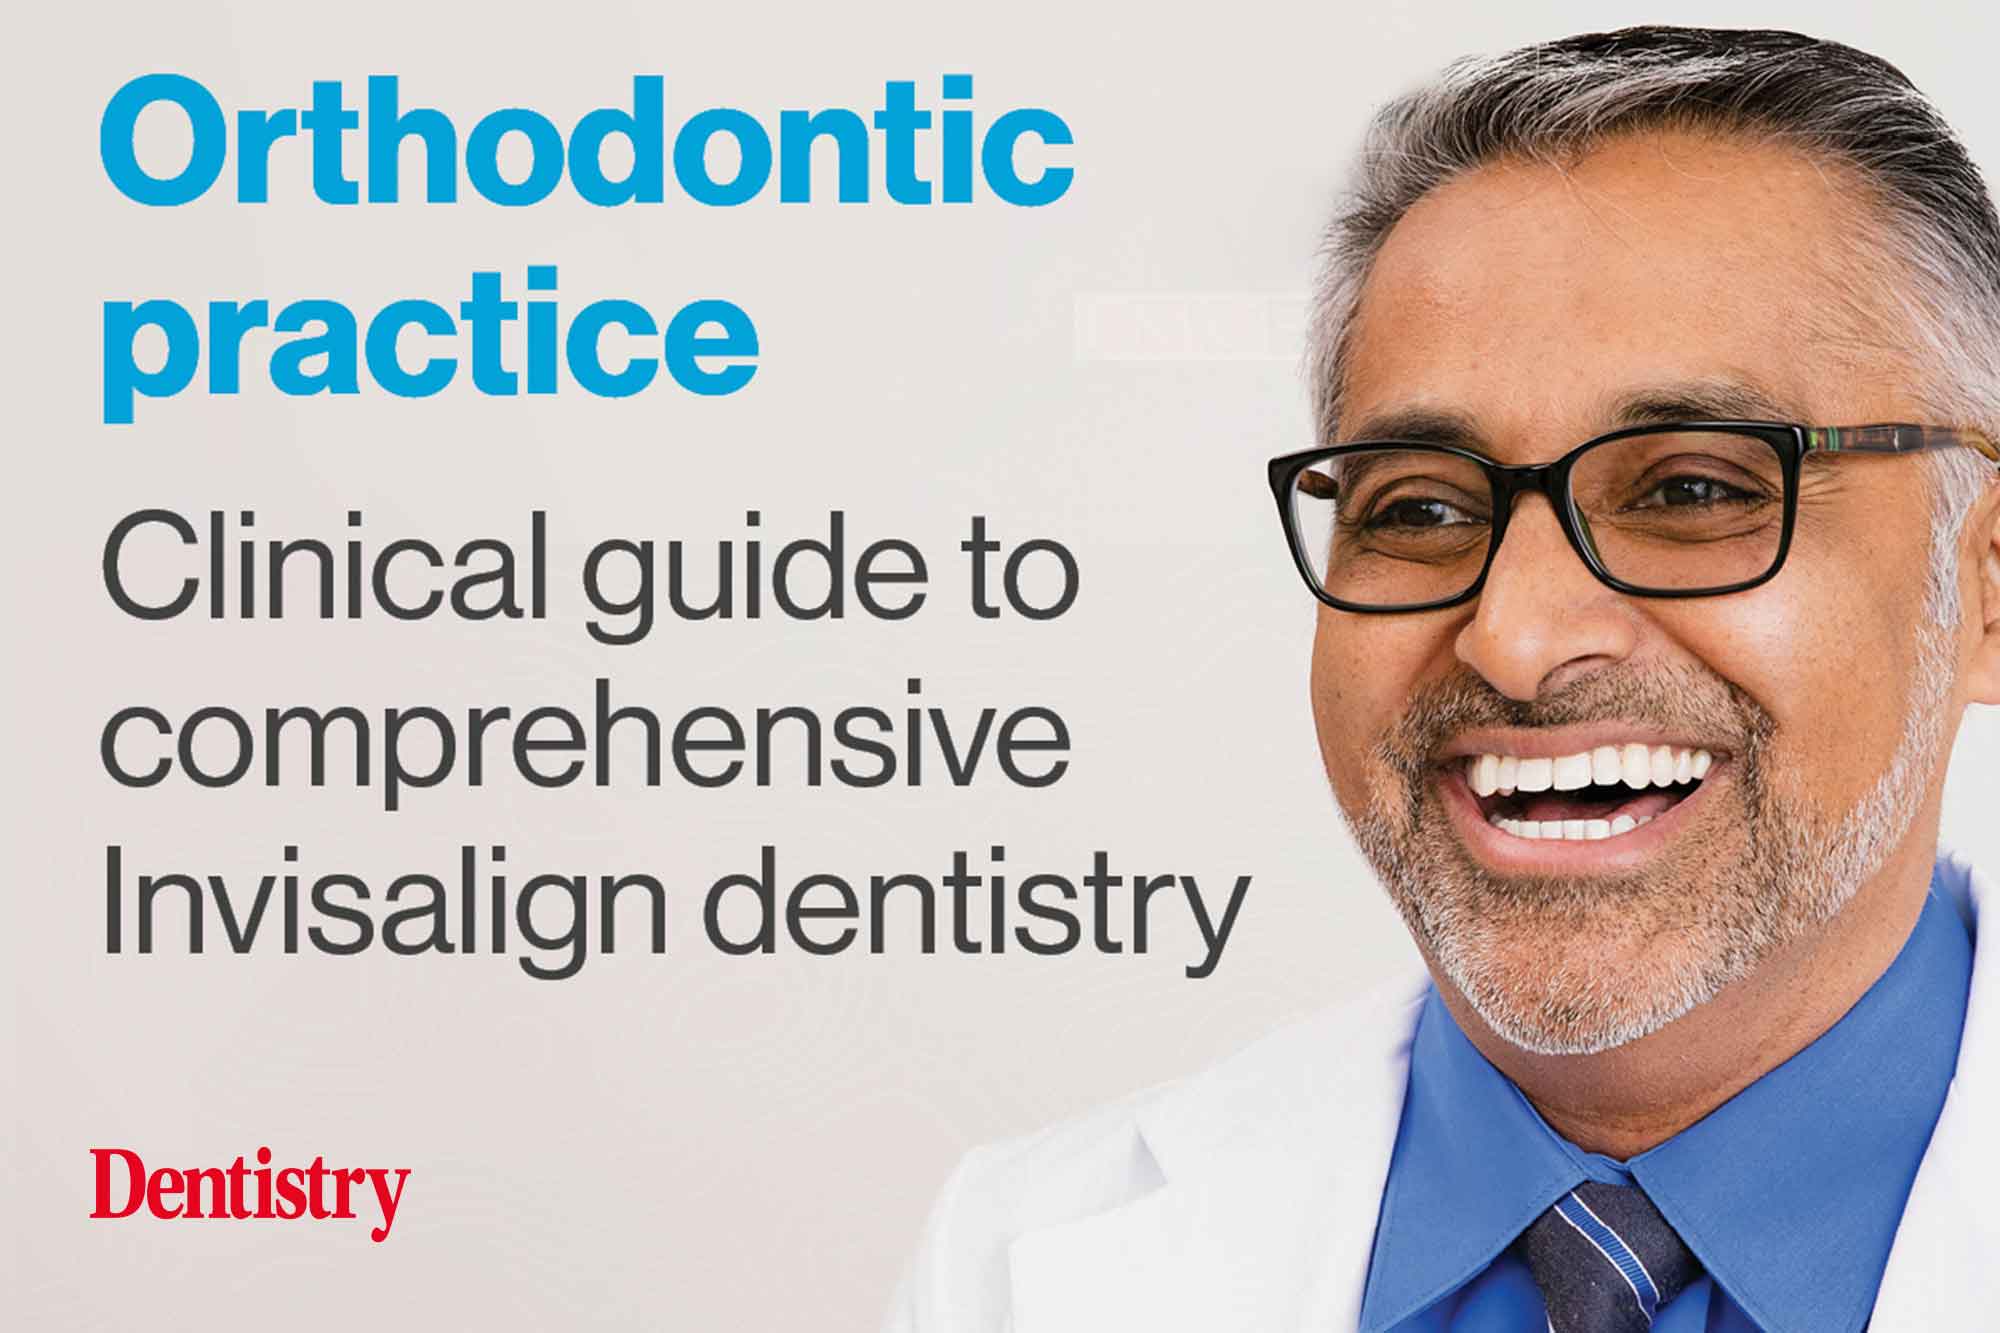 Clinical guide to comprehensive Invisalign dentistry